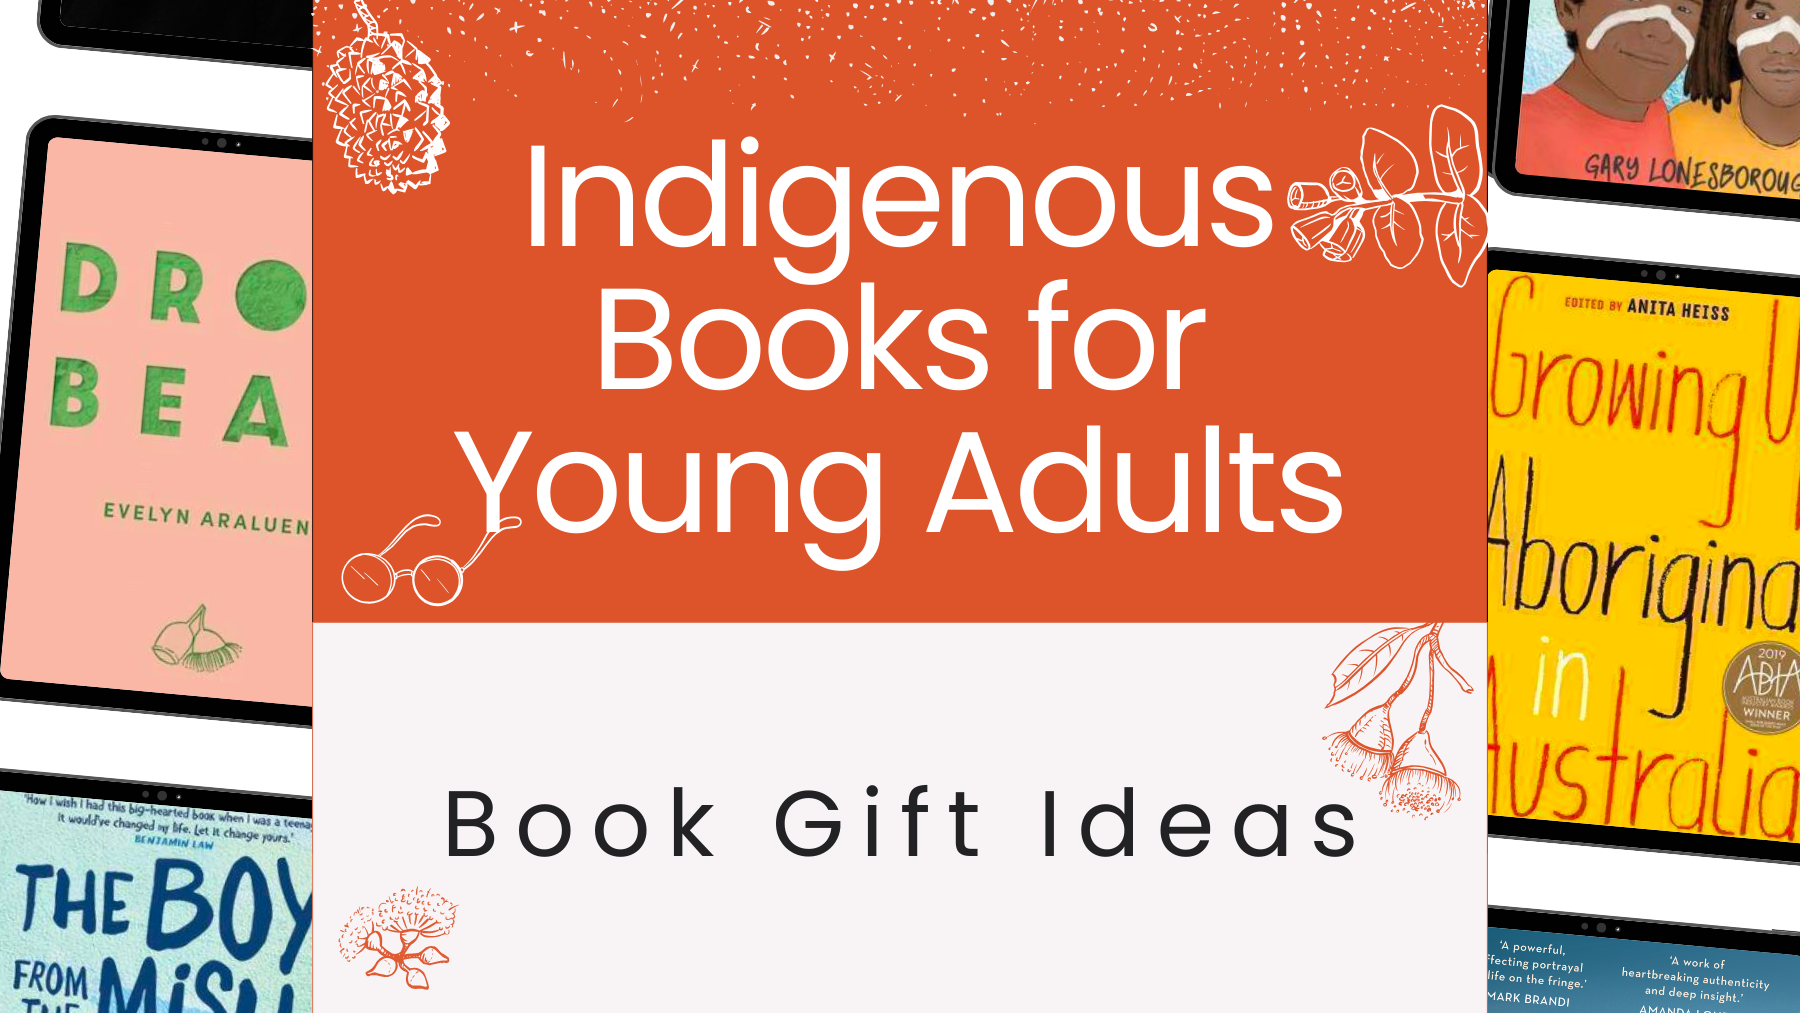 Book Gift Guide: 3 Must-Read Indigenous Books for Young Adults